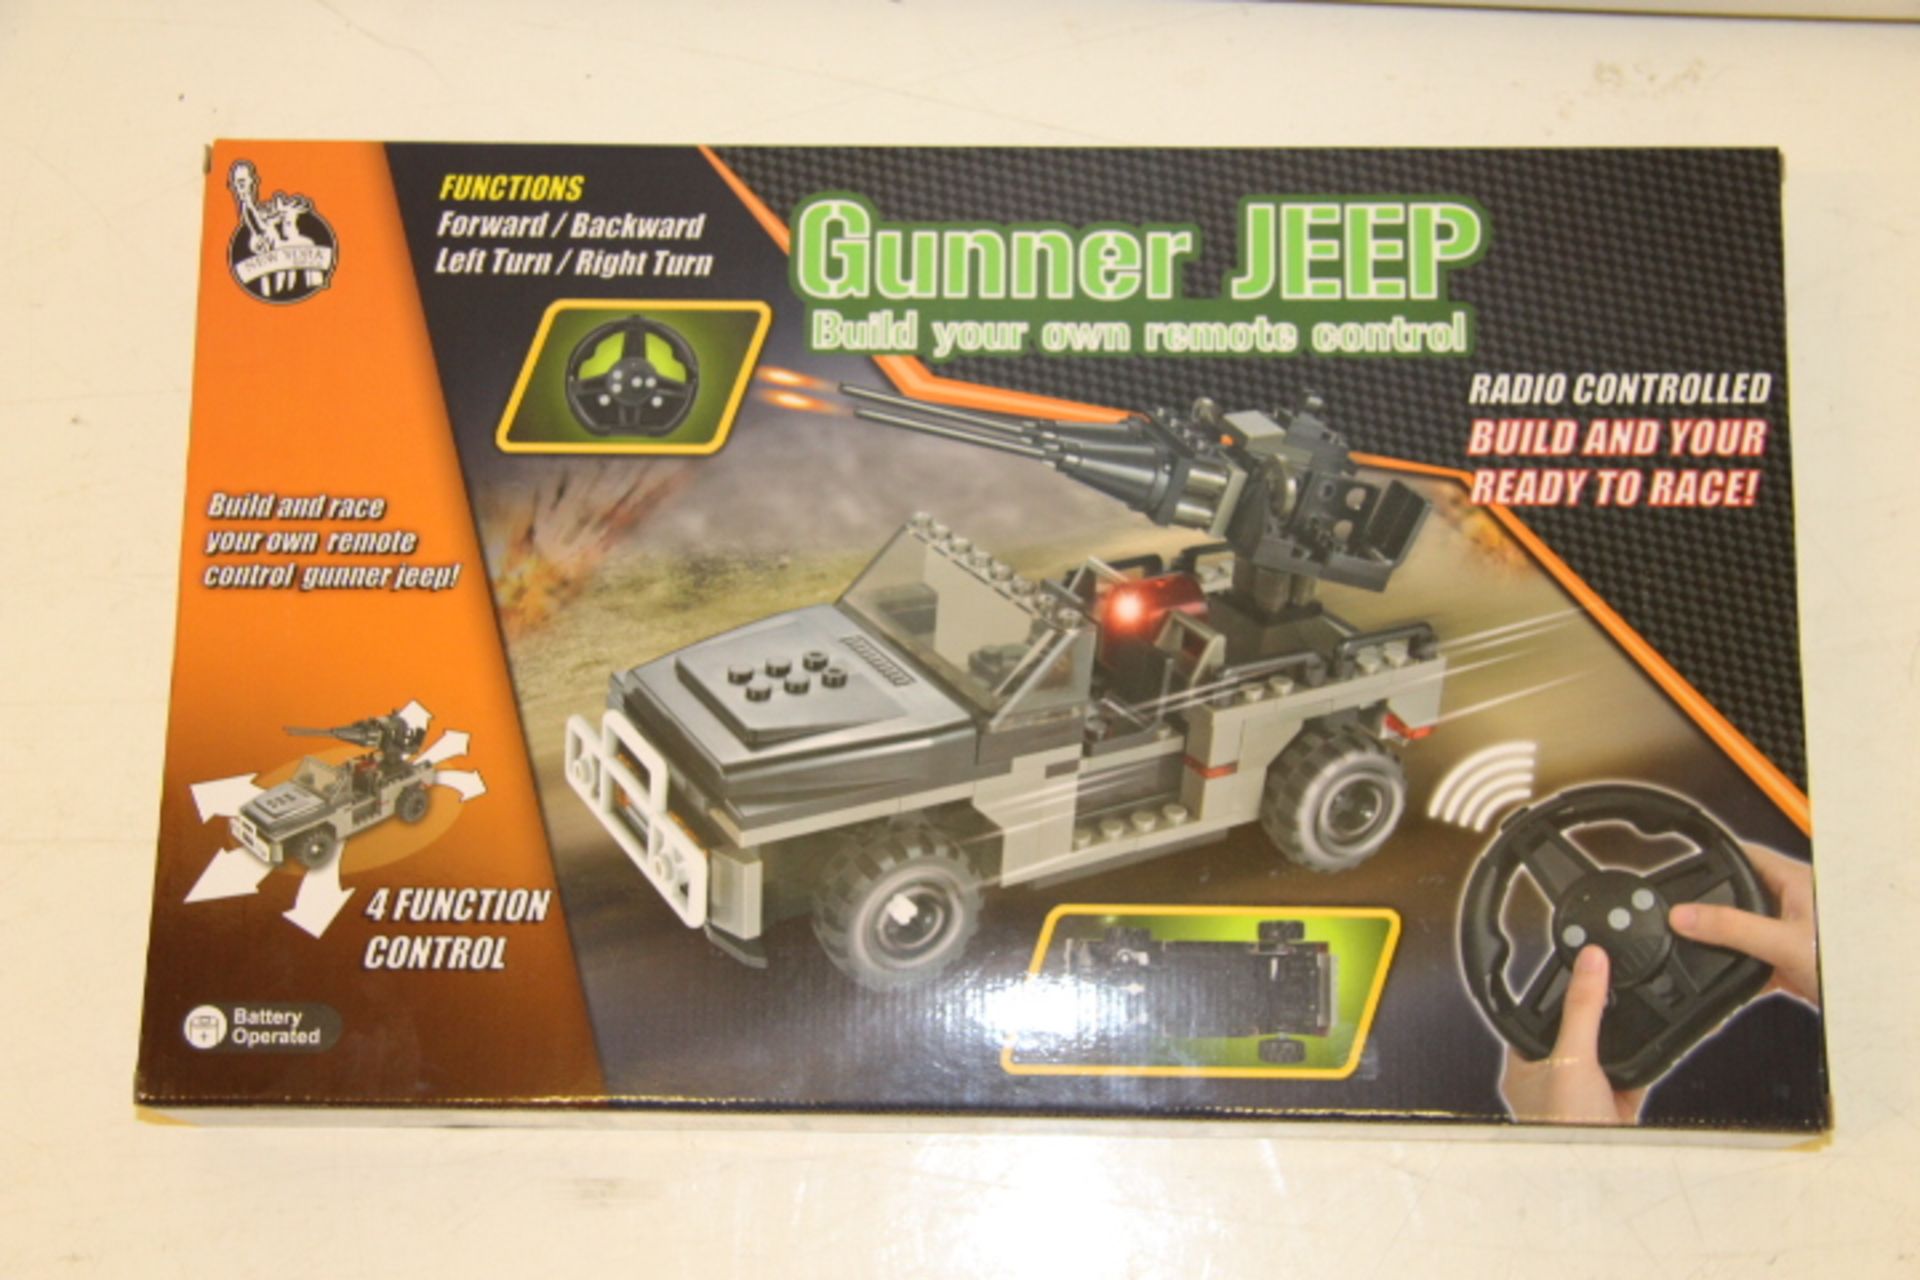 V Build it yourself radio controlled Gunner Jeep lego compatible - Image 2 of 2